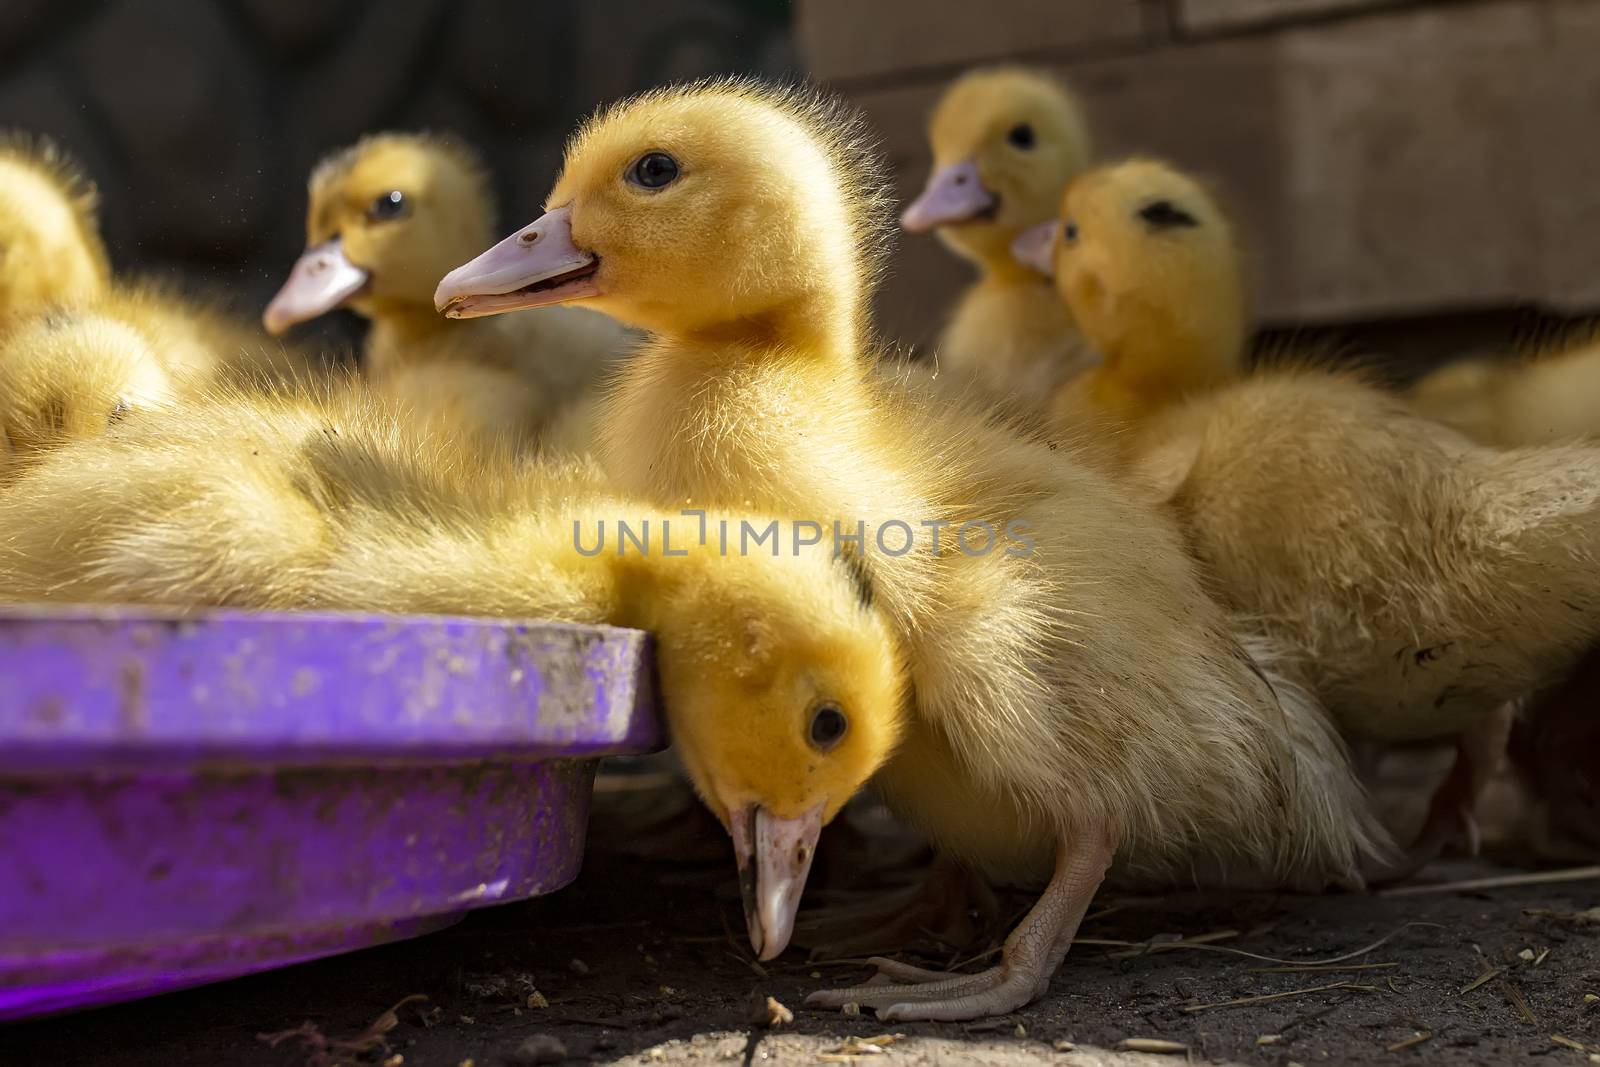 A group of ducklings. Growing poultry at home. by 977_ReX_977